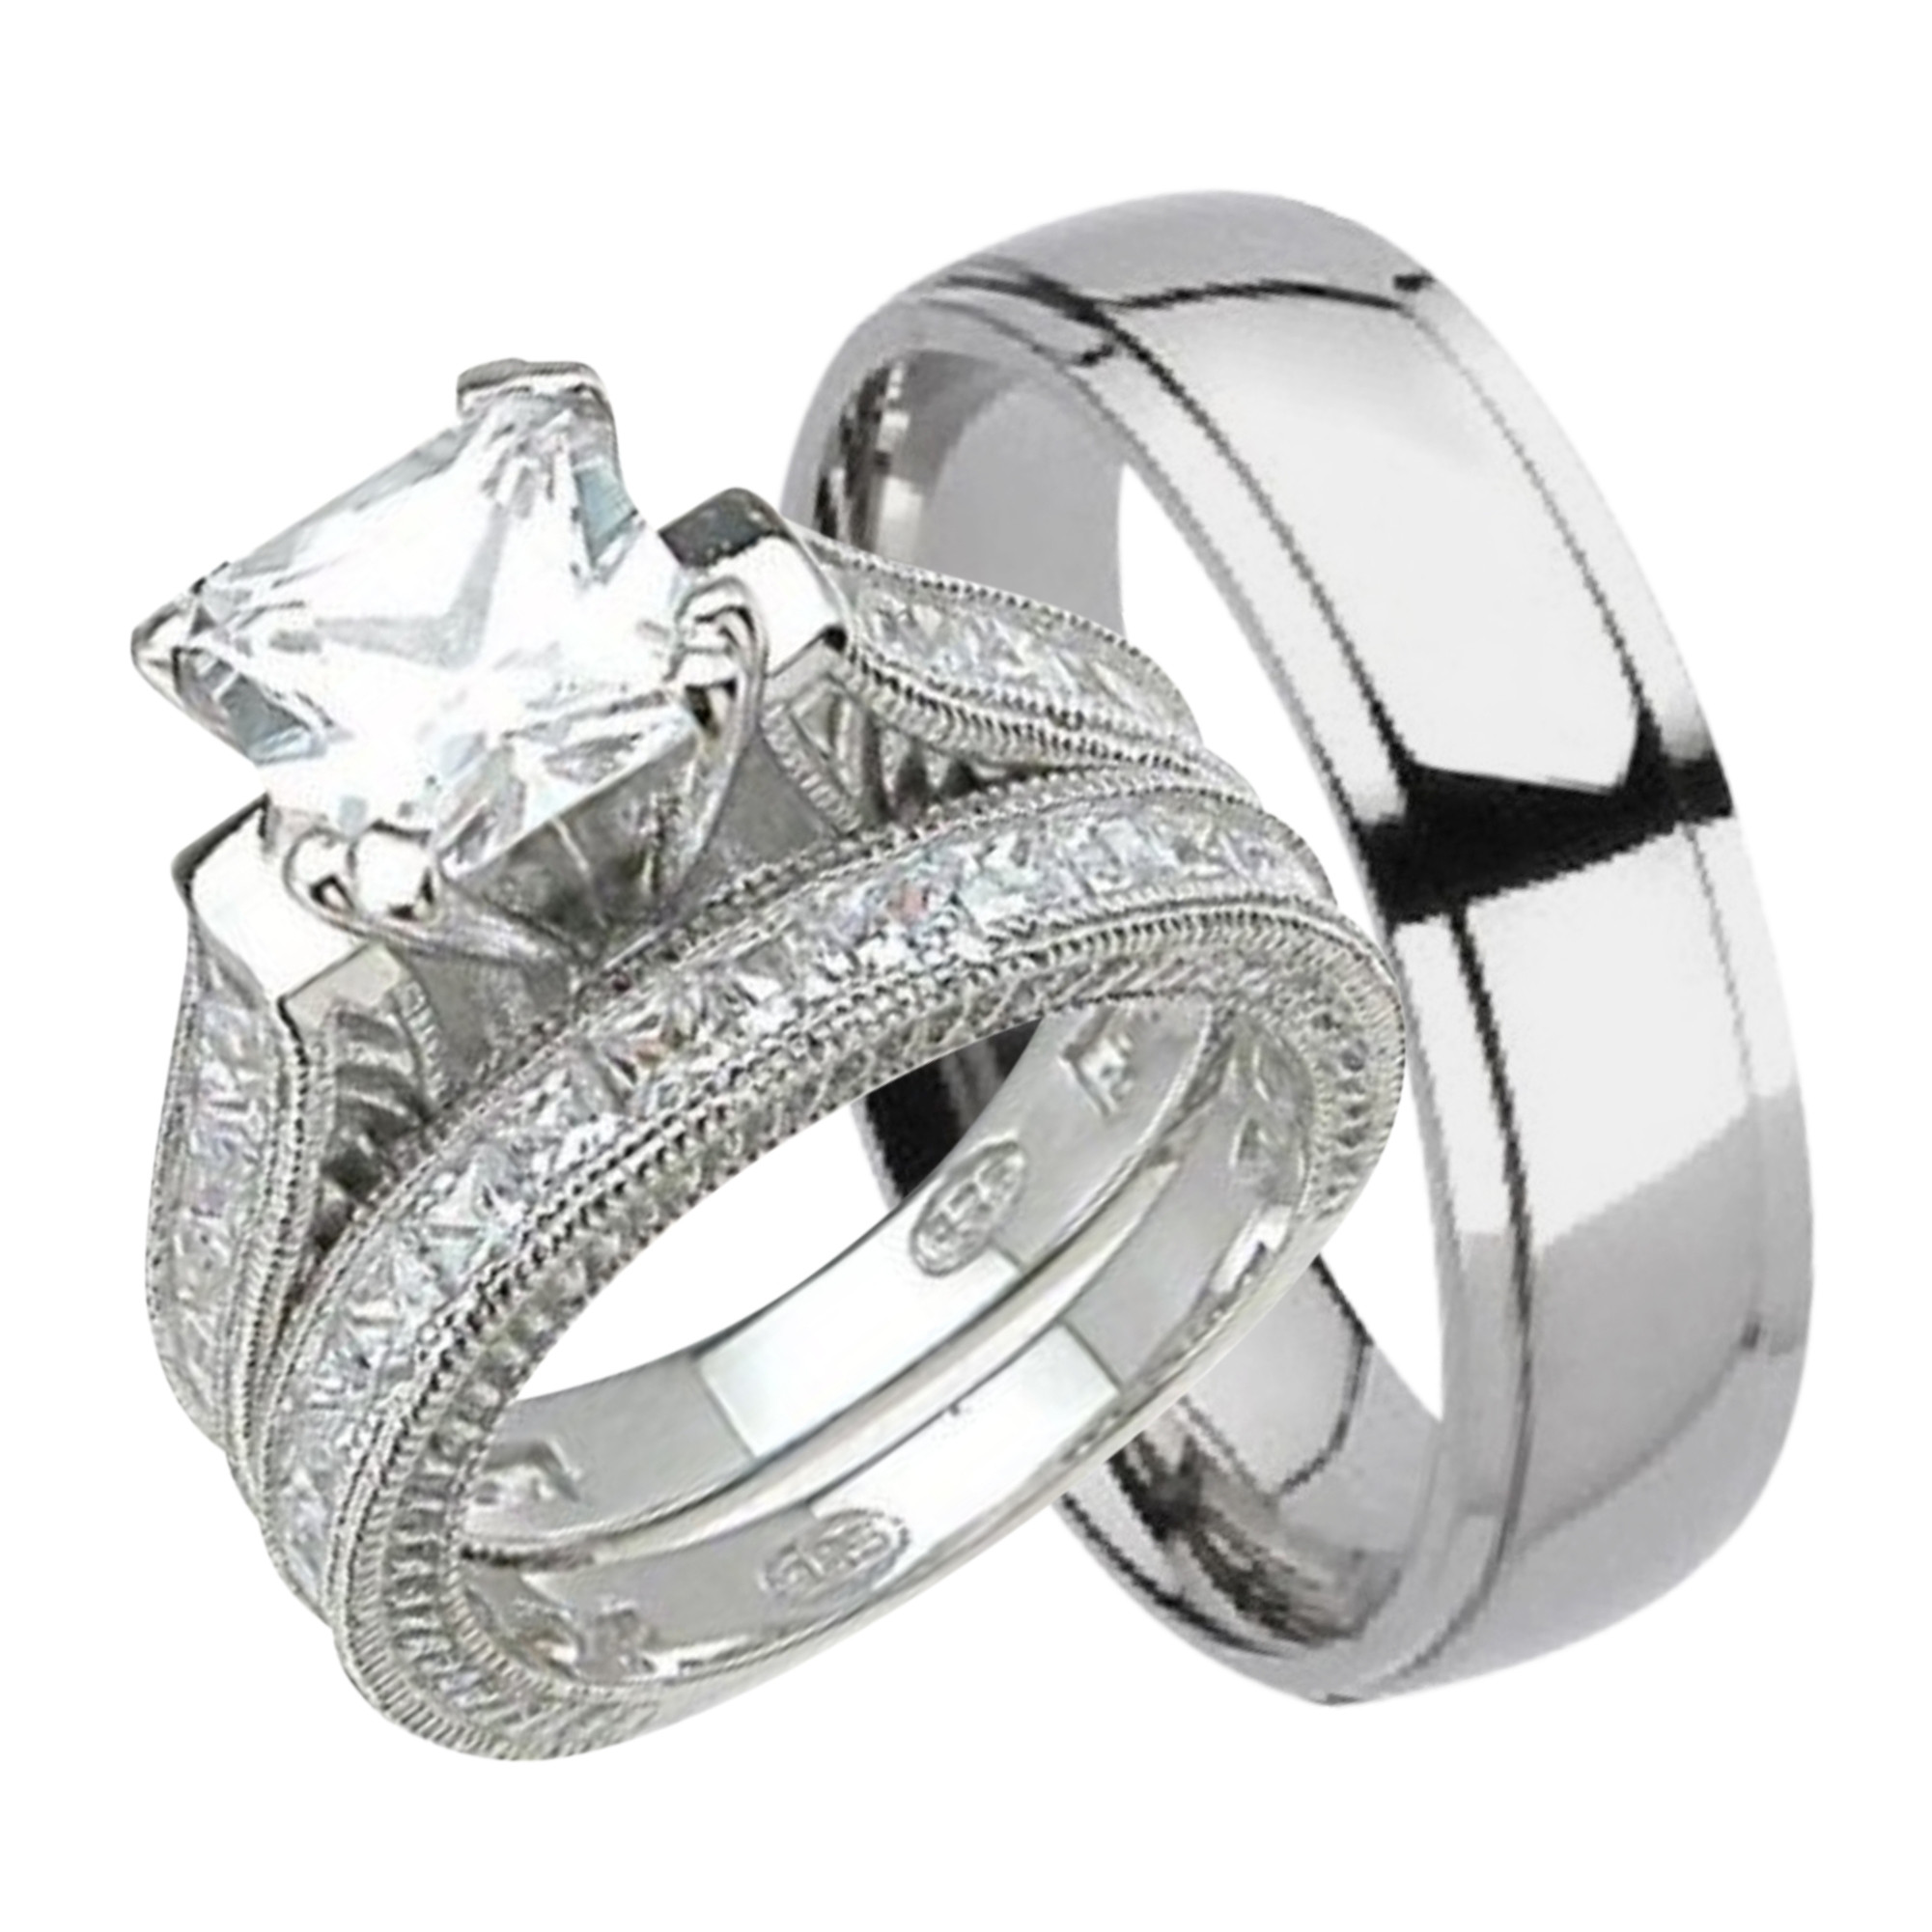 Wedding Bands For Him And Her
 Brilliant him and her wedding bands Matvuk